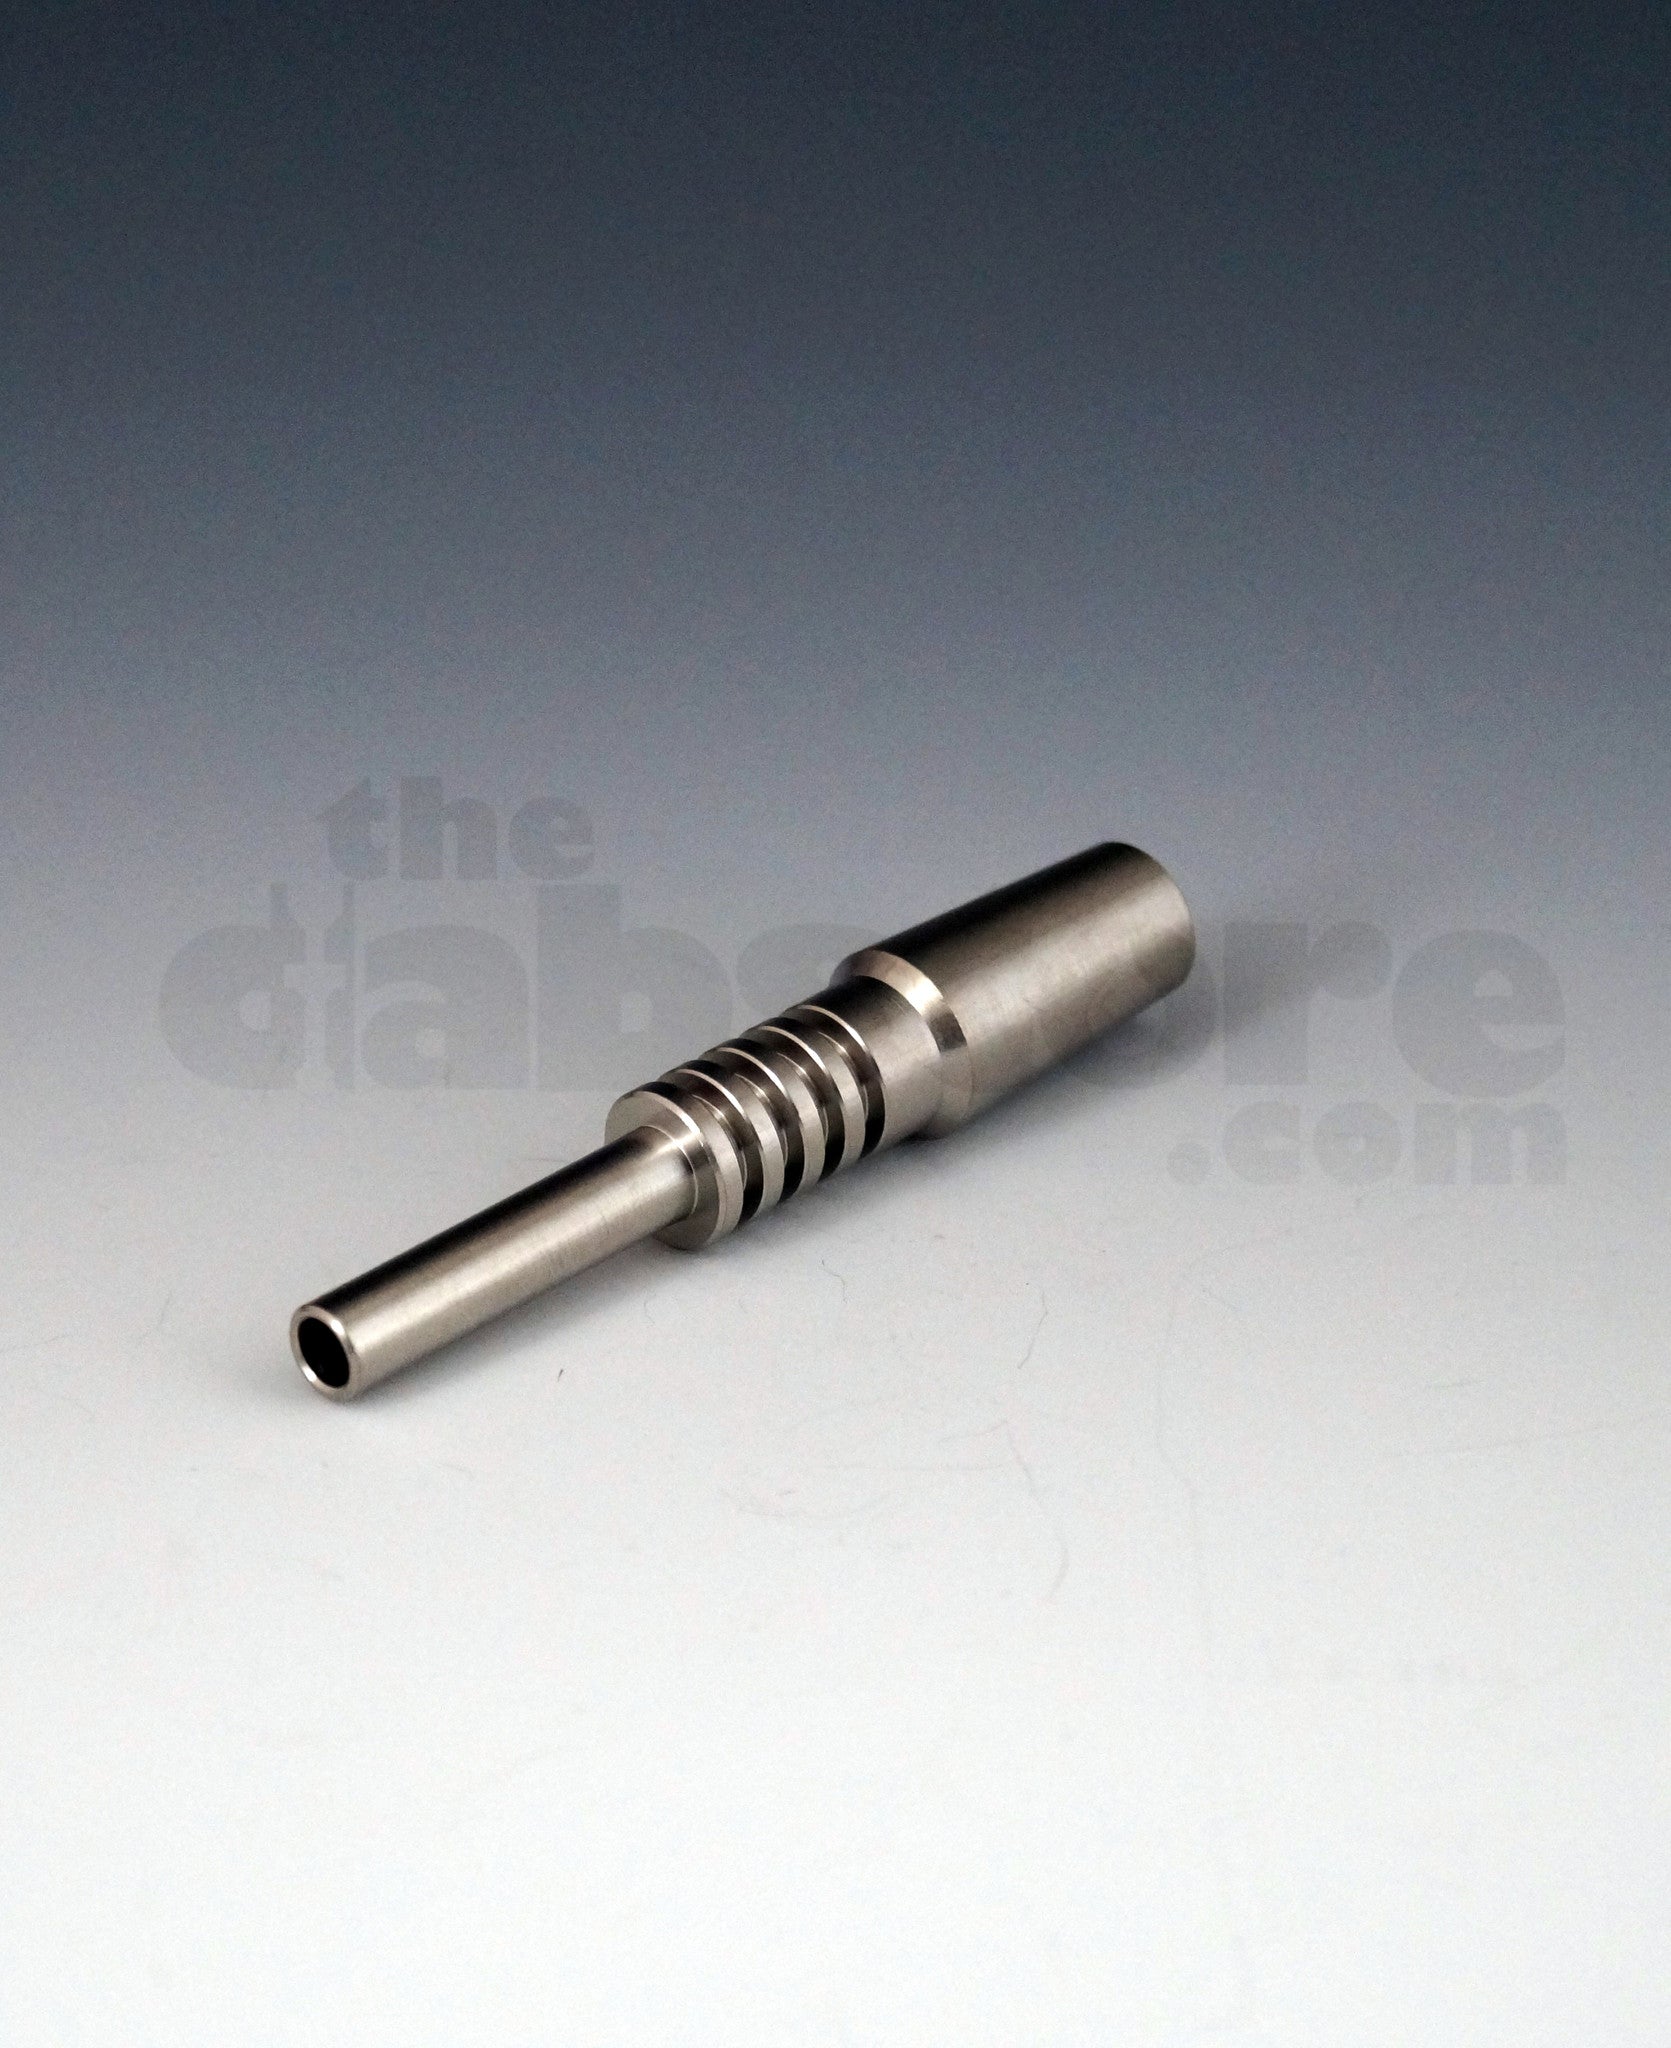 Ceramic 14mm Tip High Quality Nectar Collector Replacement Dab Honey Tip  14mm Ceramic